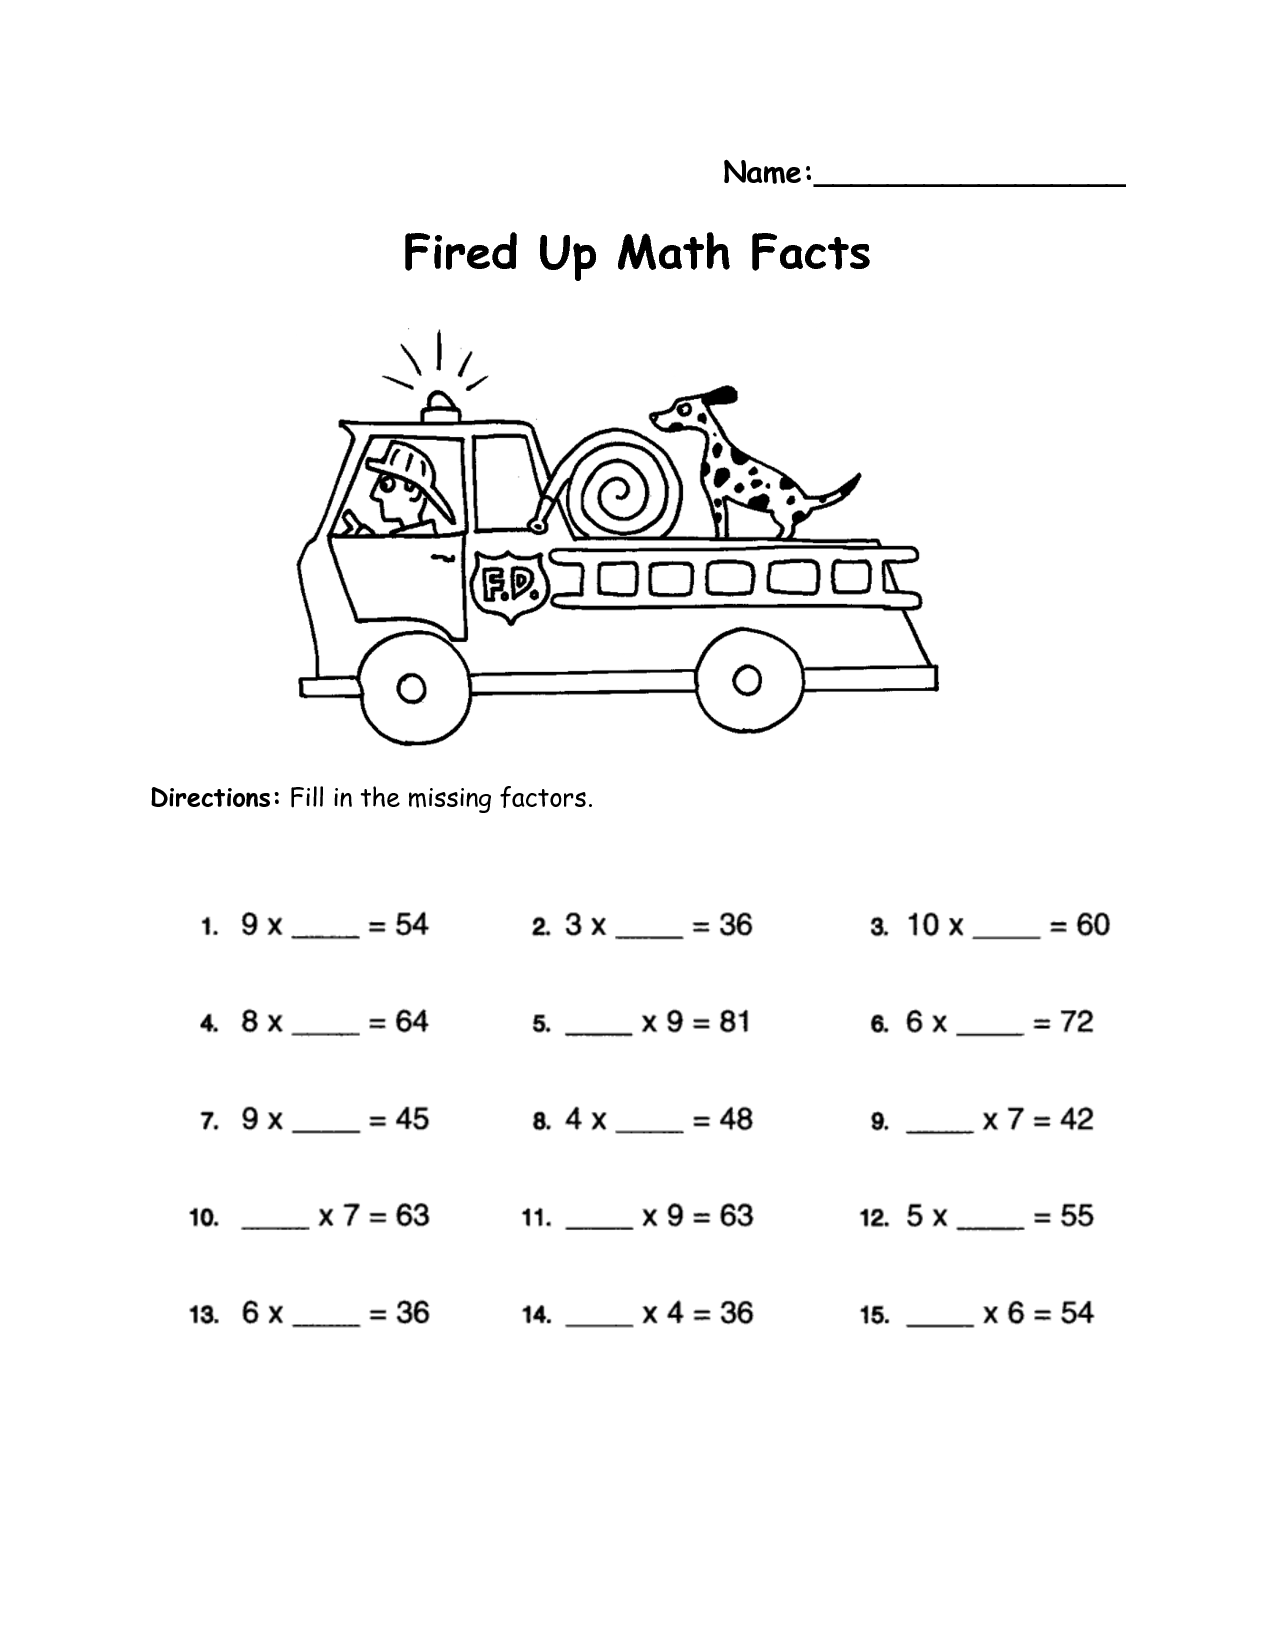 12-best-images-of-number-family-worksheets-repeated-addition-worksheets-dinosaur-color-by